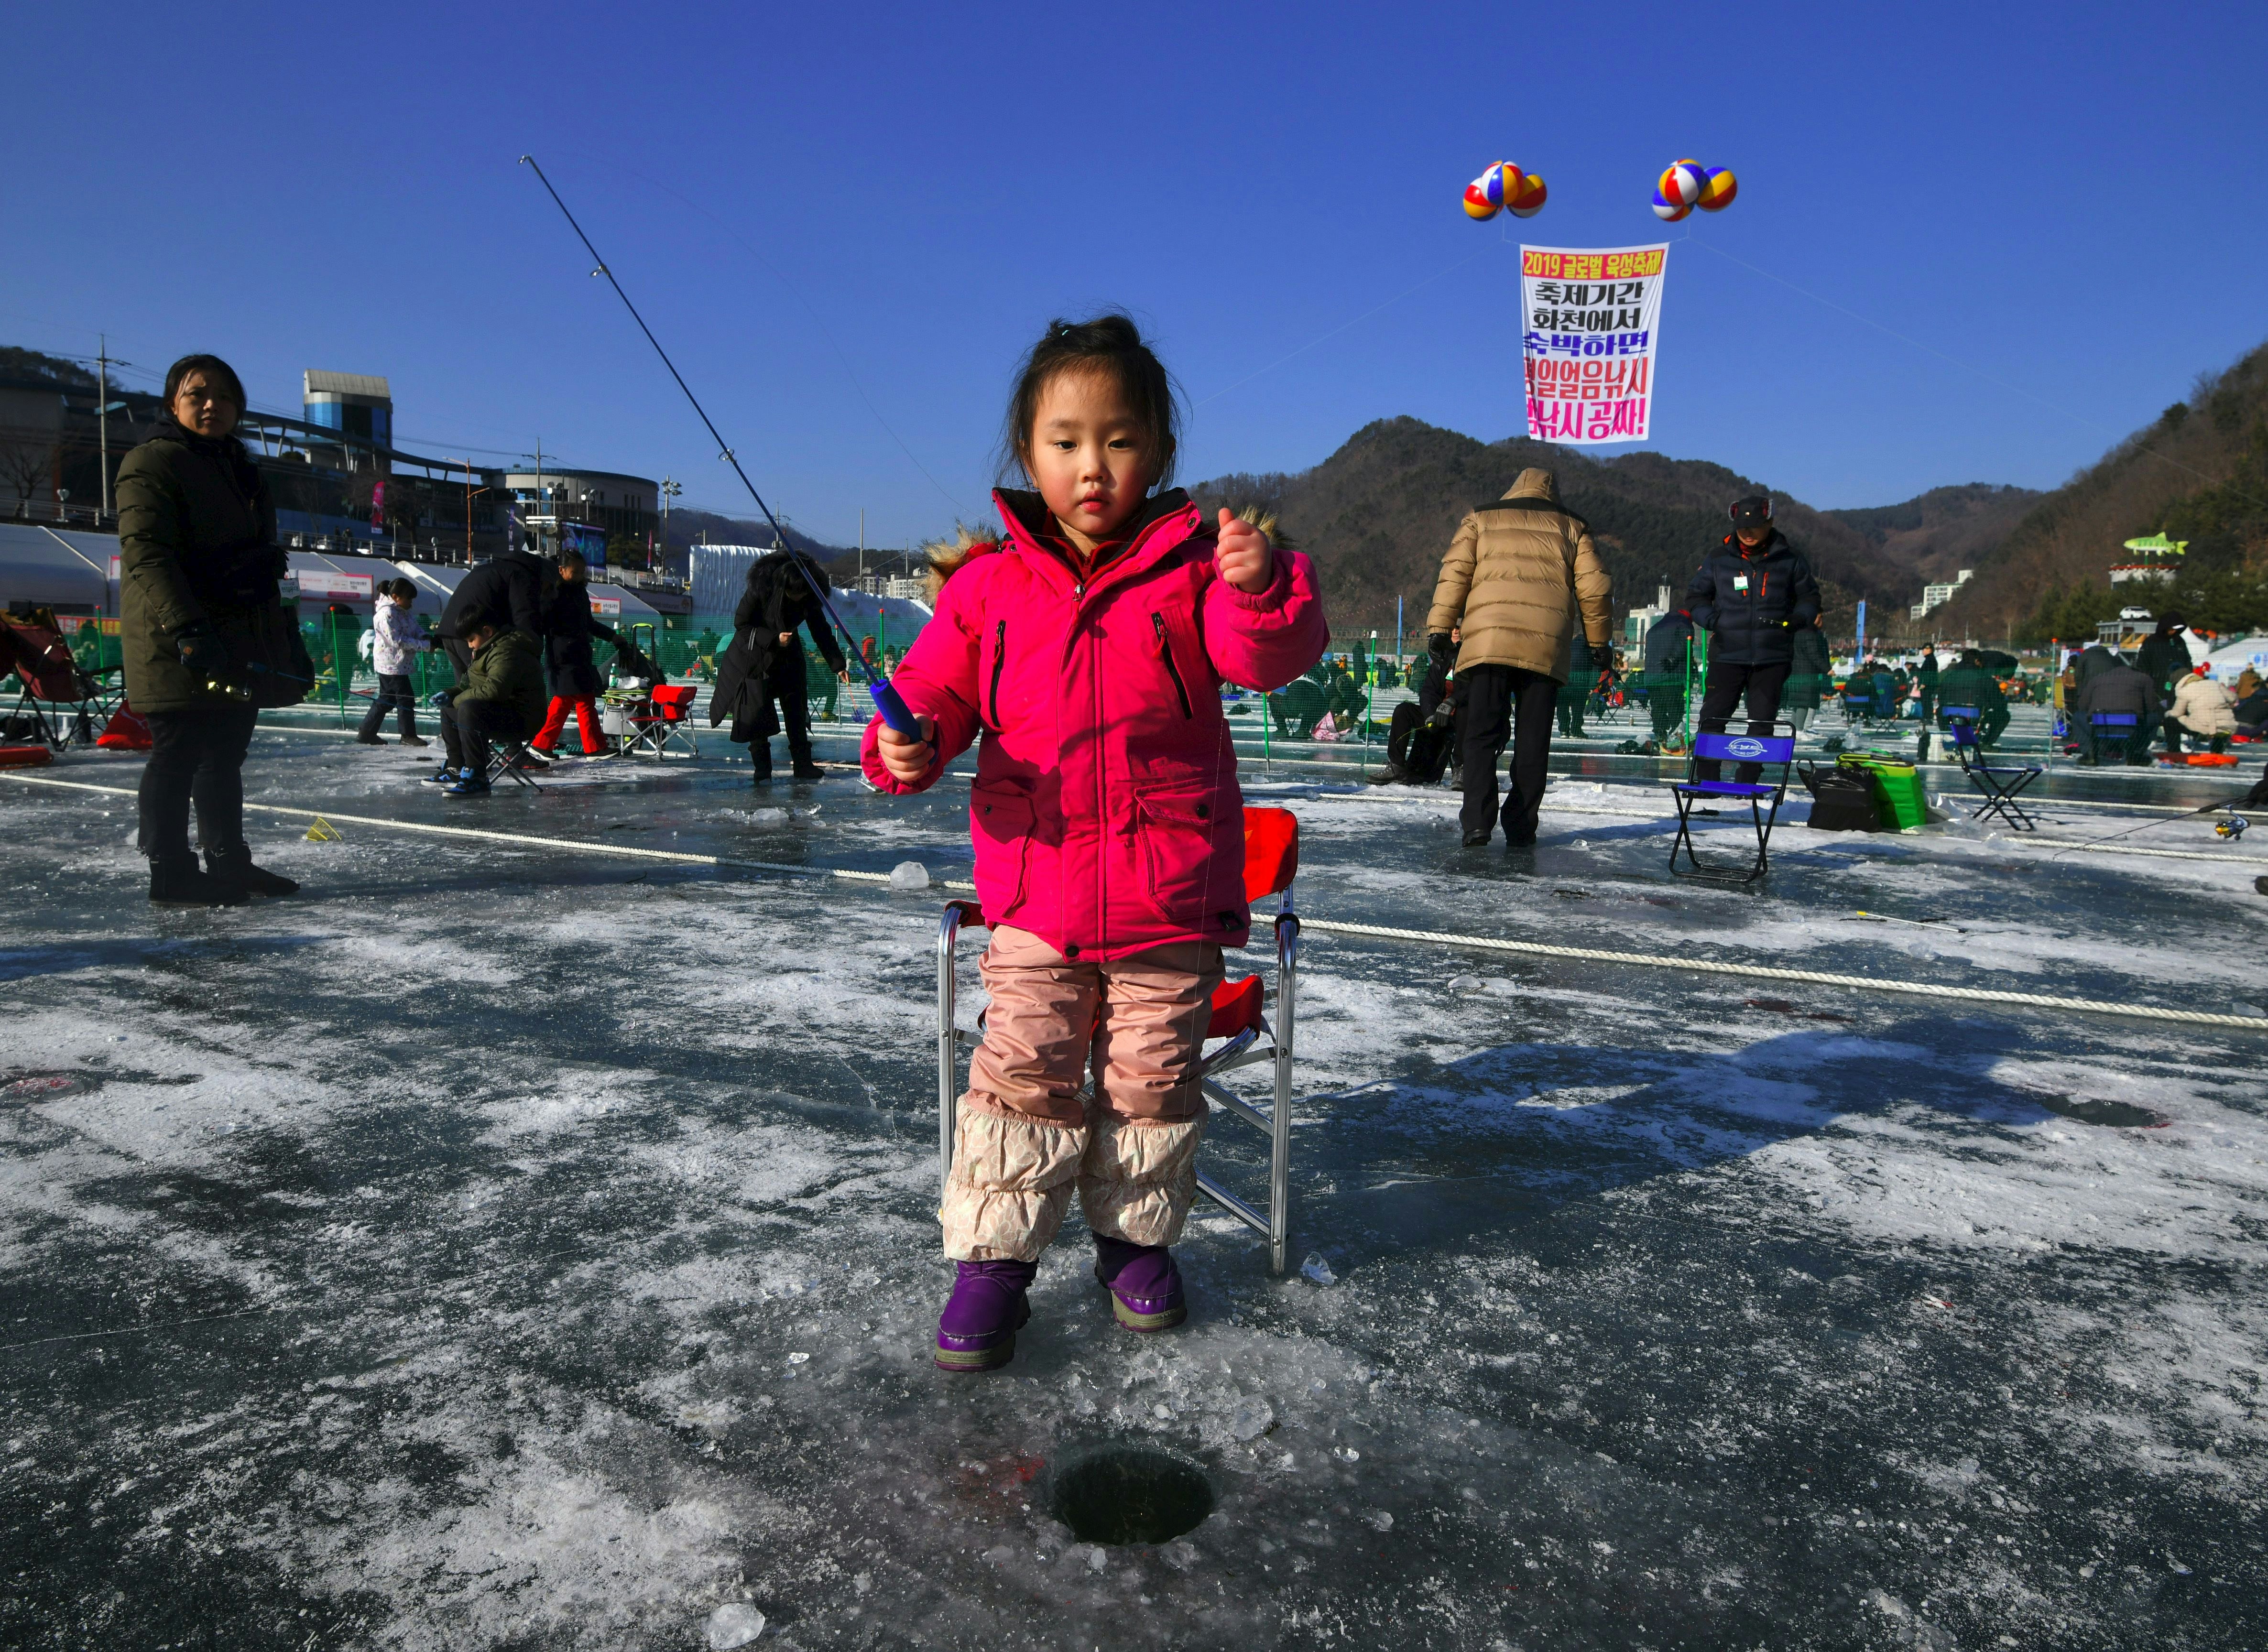 A little girl wearing a pink coat, pink winter pants and purple boots holds a fishing rod as she ice fishes during the Hwacheon Sanchenoeo Festival in South Korea. In the background a number of other people are also ice fishing. 